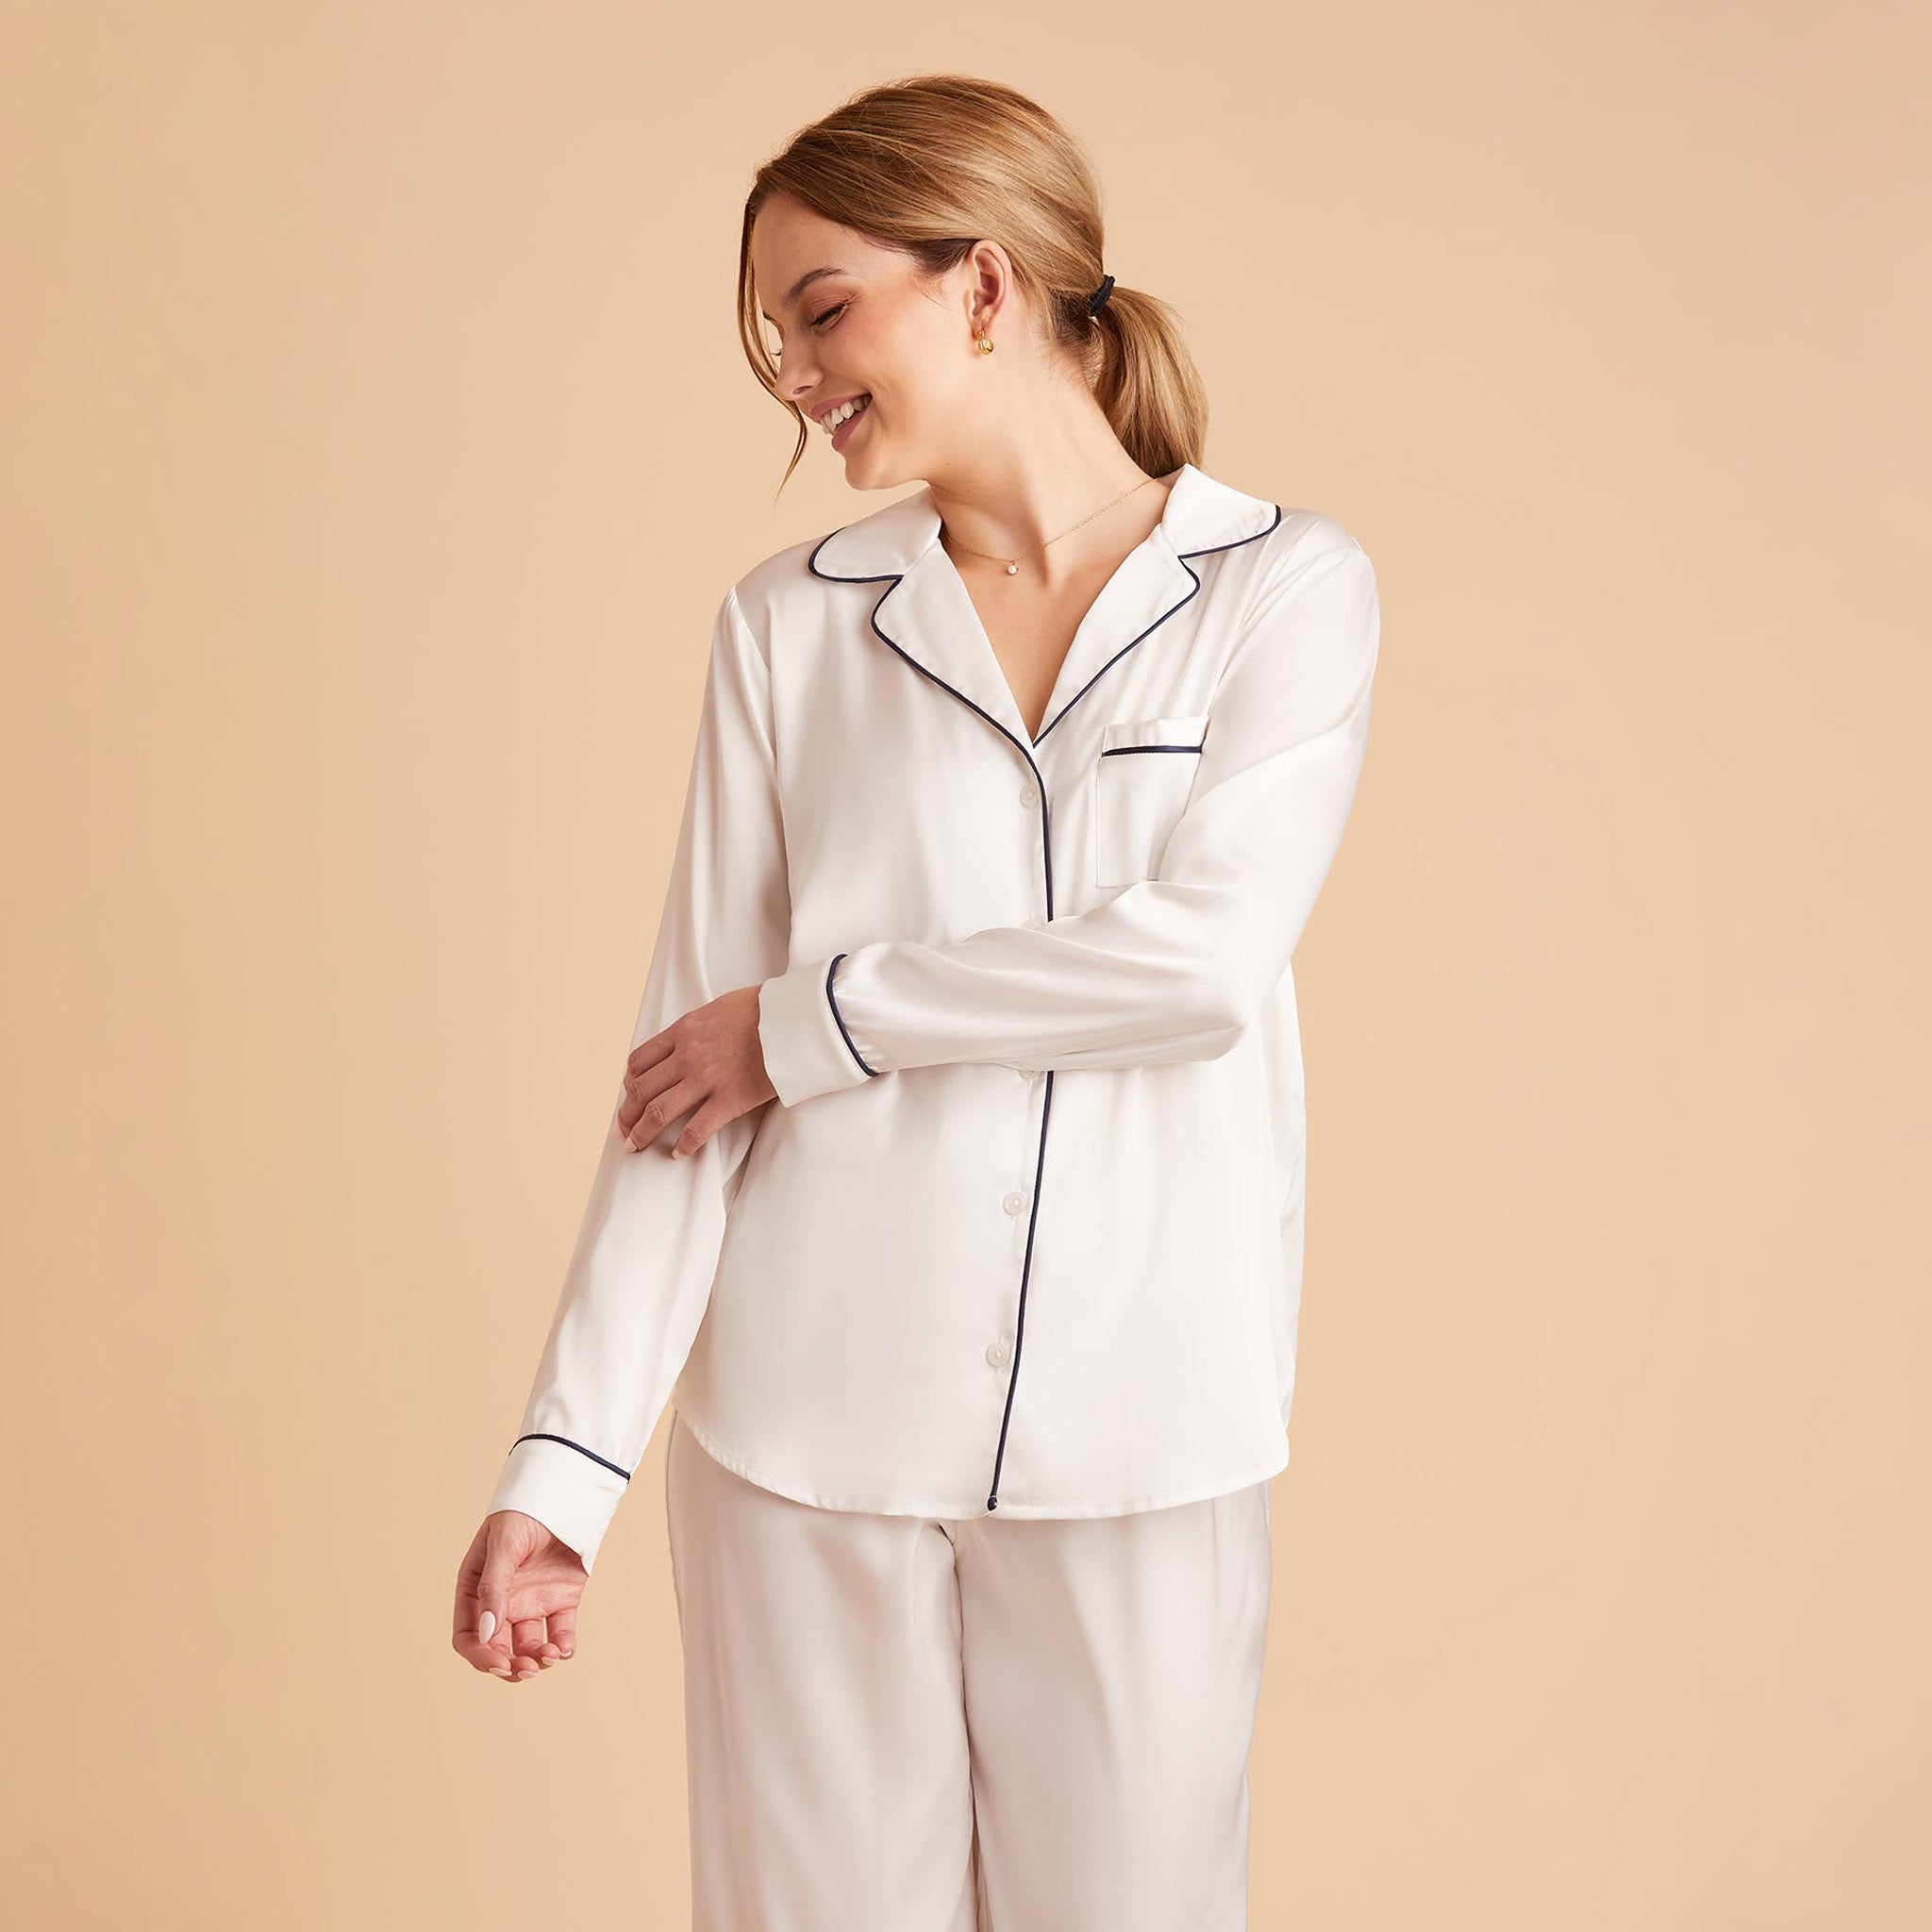 Jonny Satin Long Sleeve Pajama Top With White Piping in ivory, front view